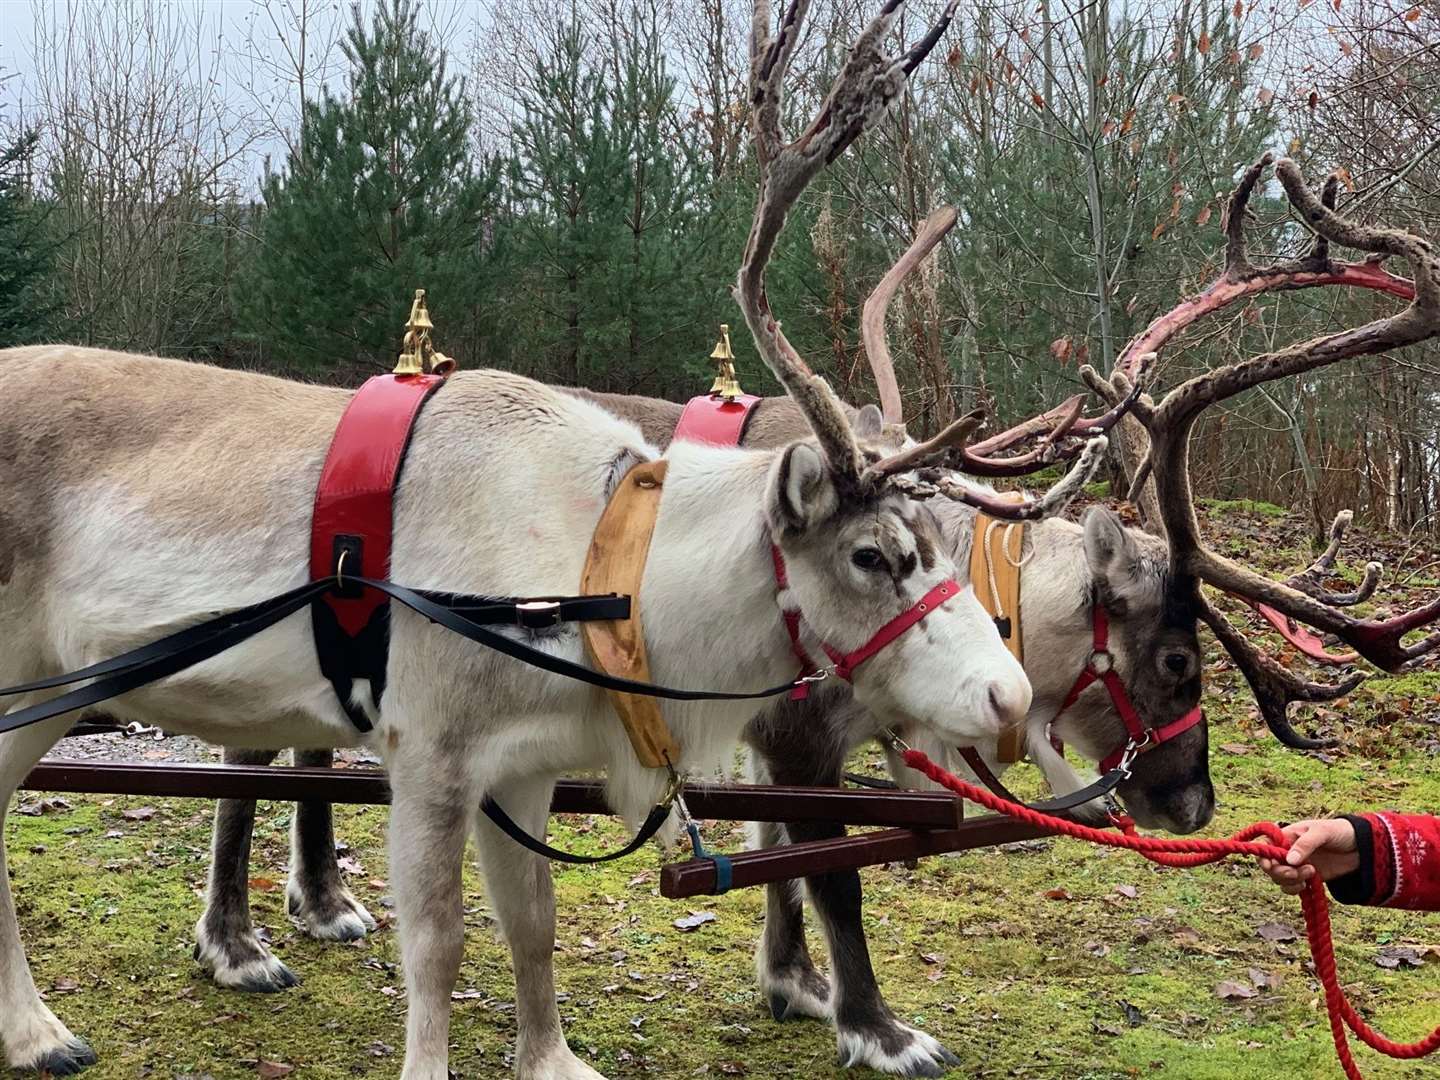 The reindeer were a major attraction.